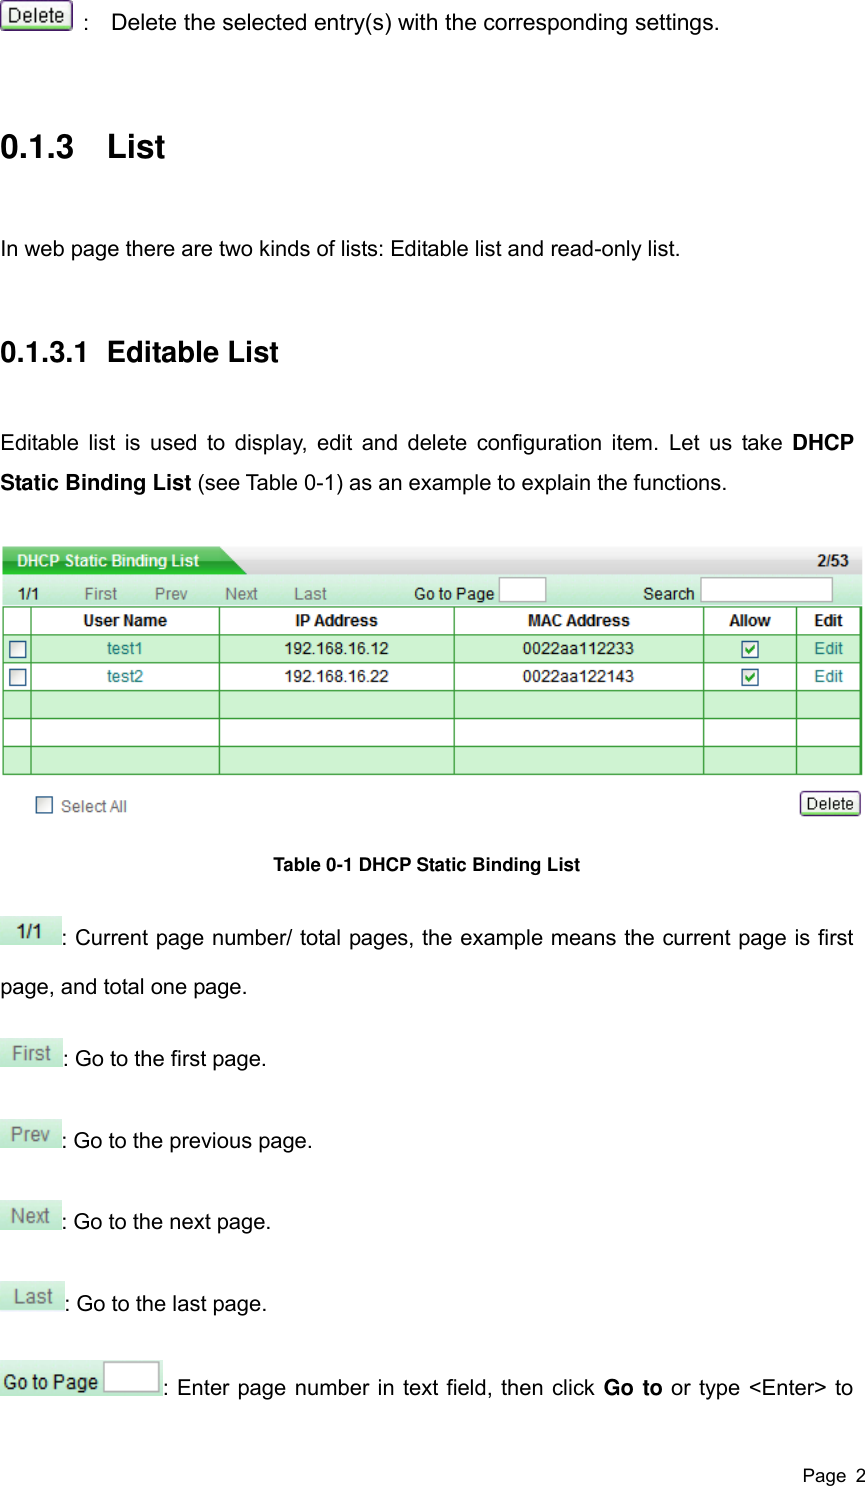  Page  2   :    Delete the selected entry(s) with the corresponding settings. 0.1.3  List In web page there are two kinds of lists: Editable list and read-only list. 0.1.3.1  Editable List Editable list is  used to display, edit and delete configuration item. Let us take DHCP Static Binding List (see Table 0-1) as an example to explain the functions.  Table 0-1 DHCP Static Binding List : Current page number/ total pages, the example means the current page is first page, and total one page. : Go to the first page. : Go to the previous page. : Go to the next page. : Go to the last page. : Enter page number in text field, then click Go to or type &lt;Enter&gt; to 